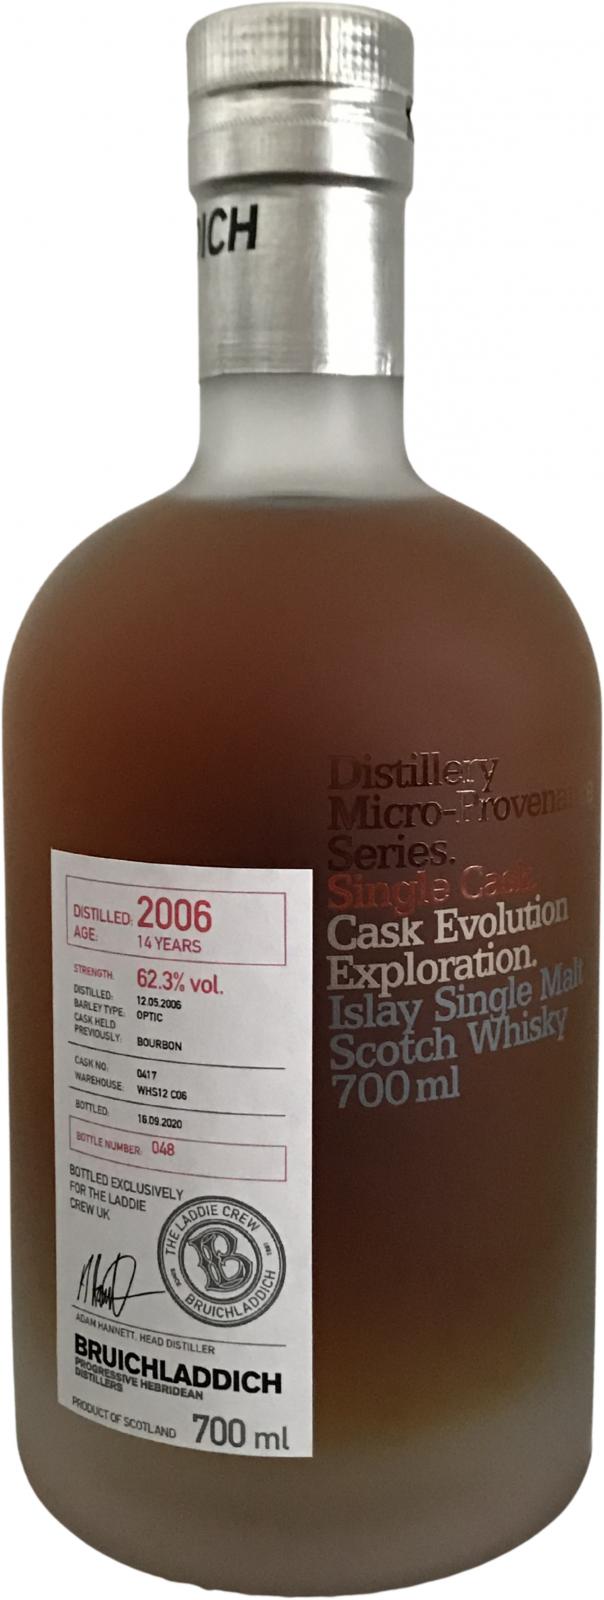 Bruichladdich Micro-Provenance Single Cask #0417 2006 14 Year Old Whisky | 700ML